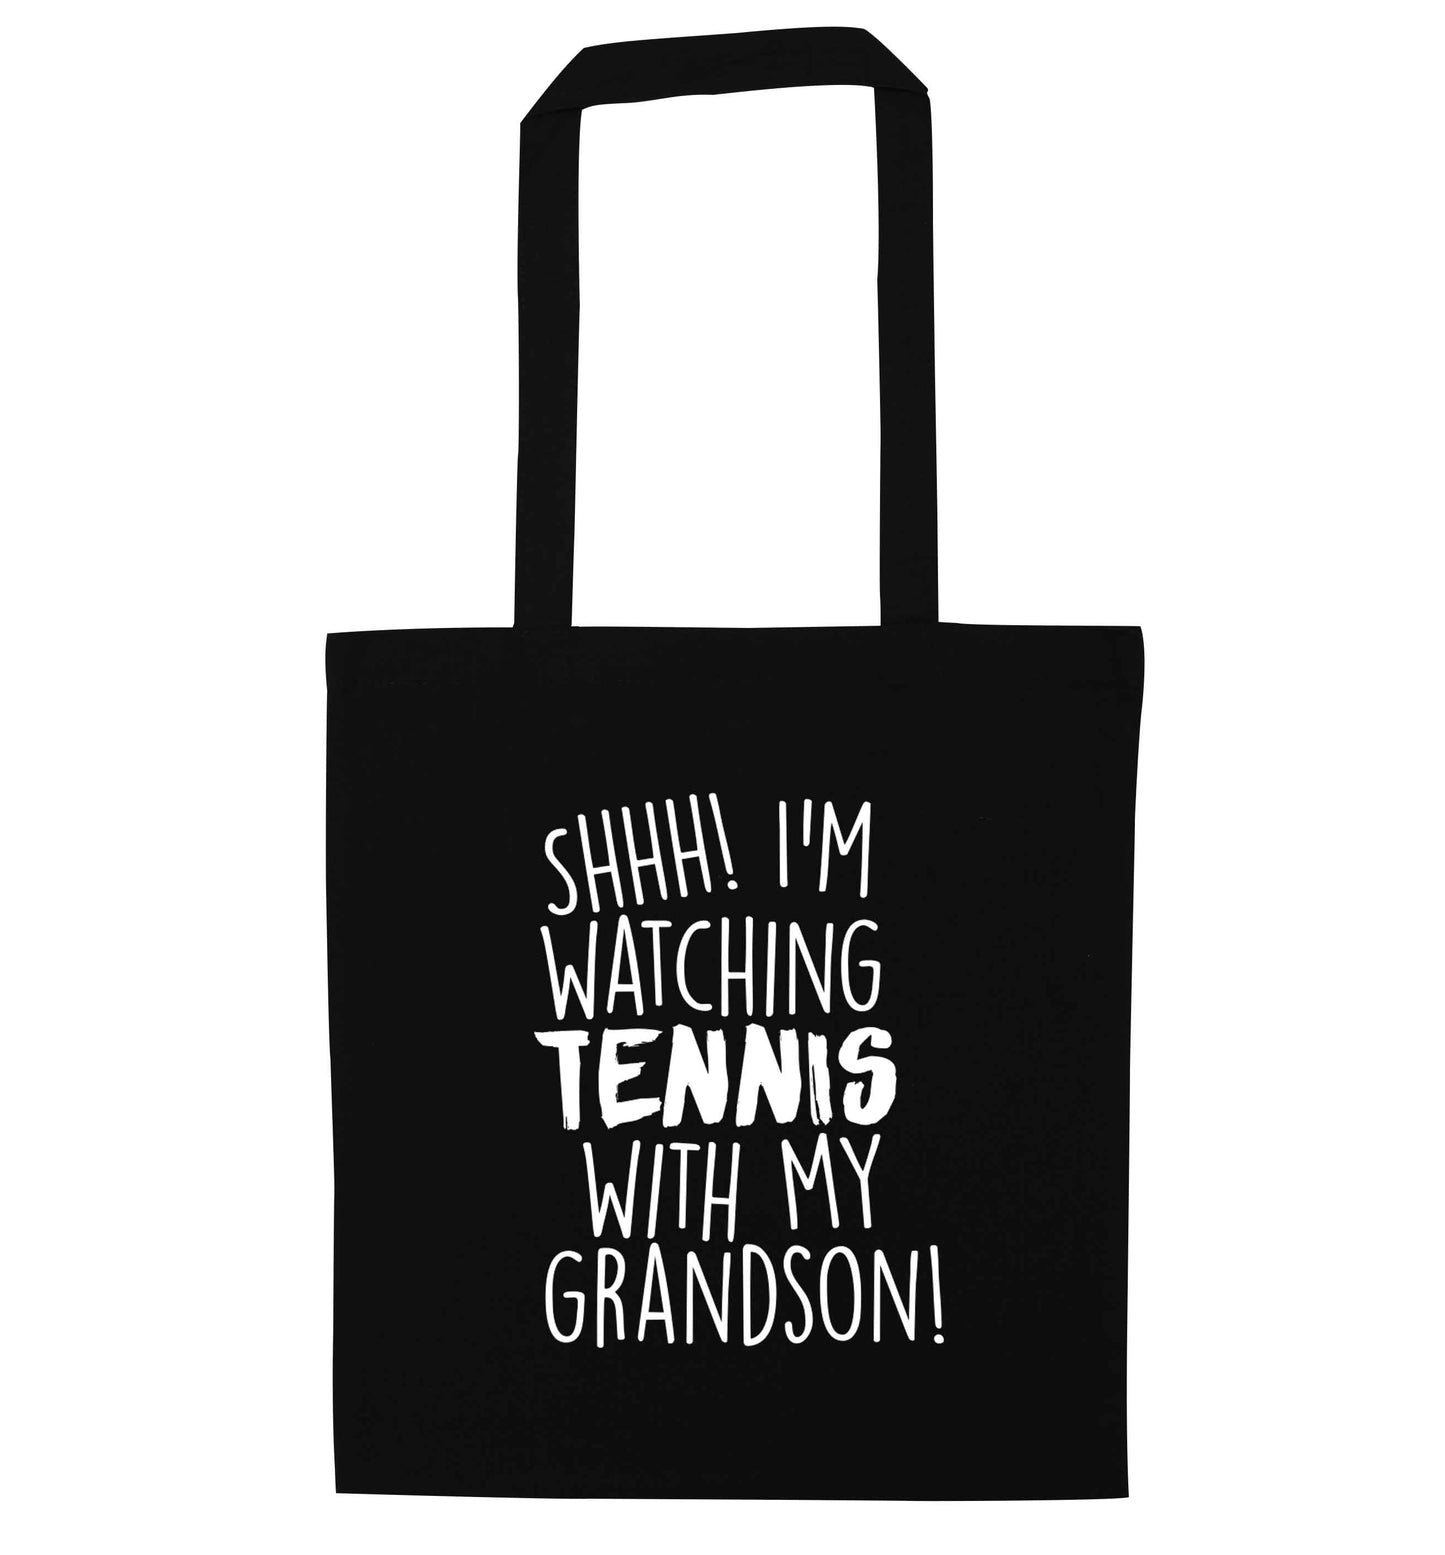 Shh! I'm watching tennis with my grandson! black tote bag